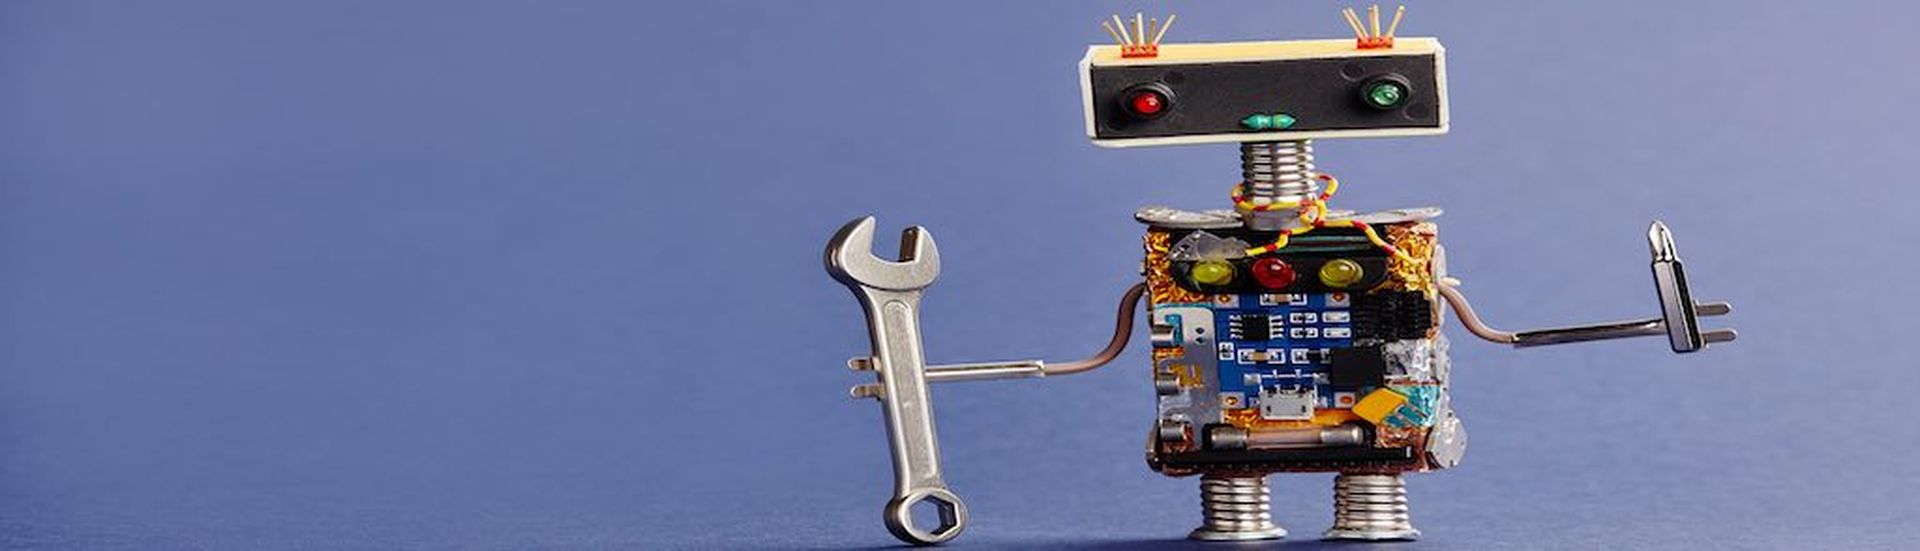 Robot serviceman with hand wrench and screwdriver on blue background. Abstract mechanical toy worker made of electronic circuits, chip capacitors vintage resistors.